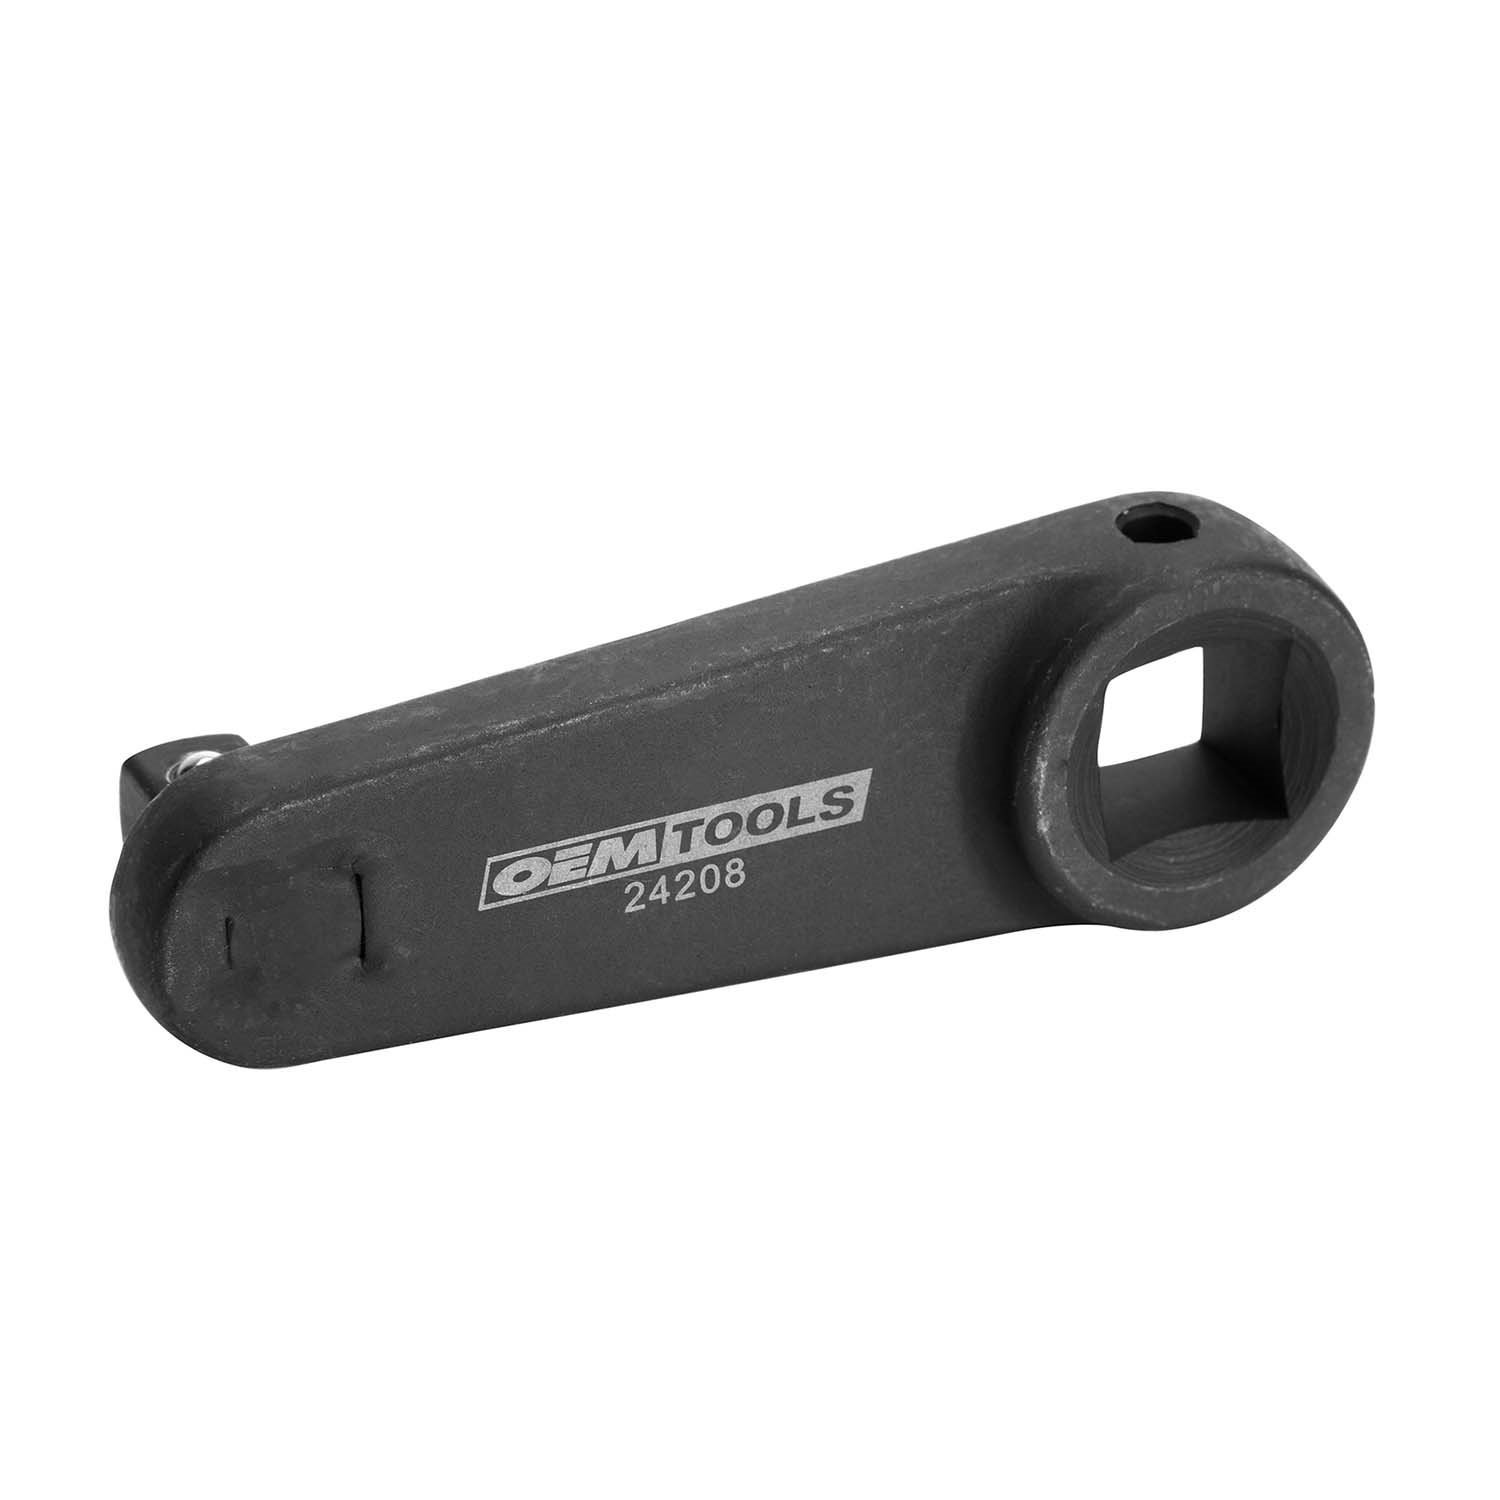 OEMTOOLS 24208 3/4 in. to 1/2 in. Drive Torque Wrench Adapter for Ford 6.0L  Power Stroke Diesel Engine